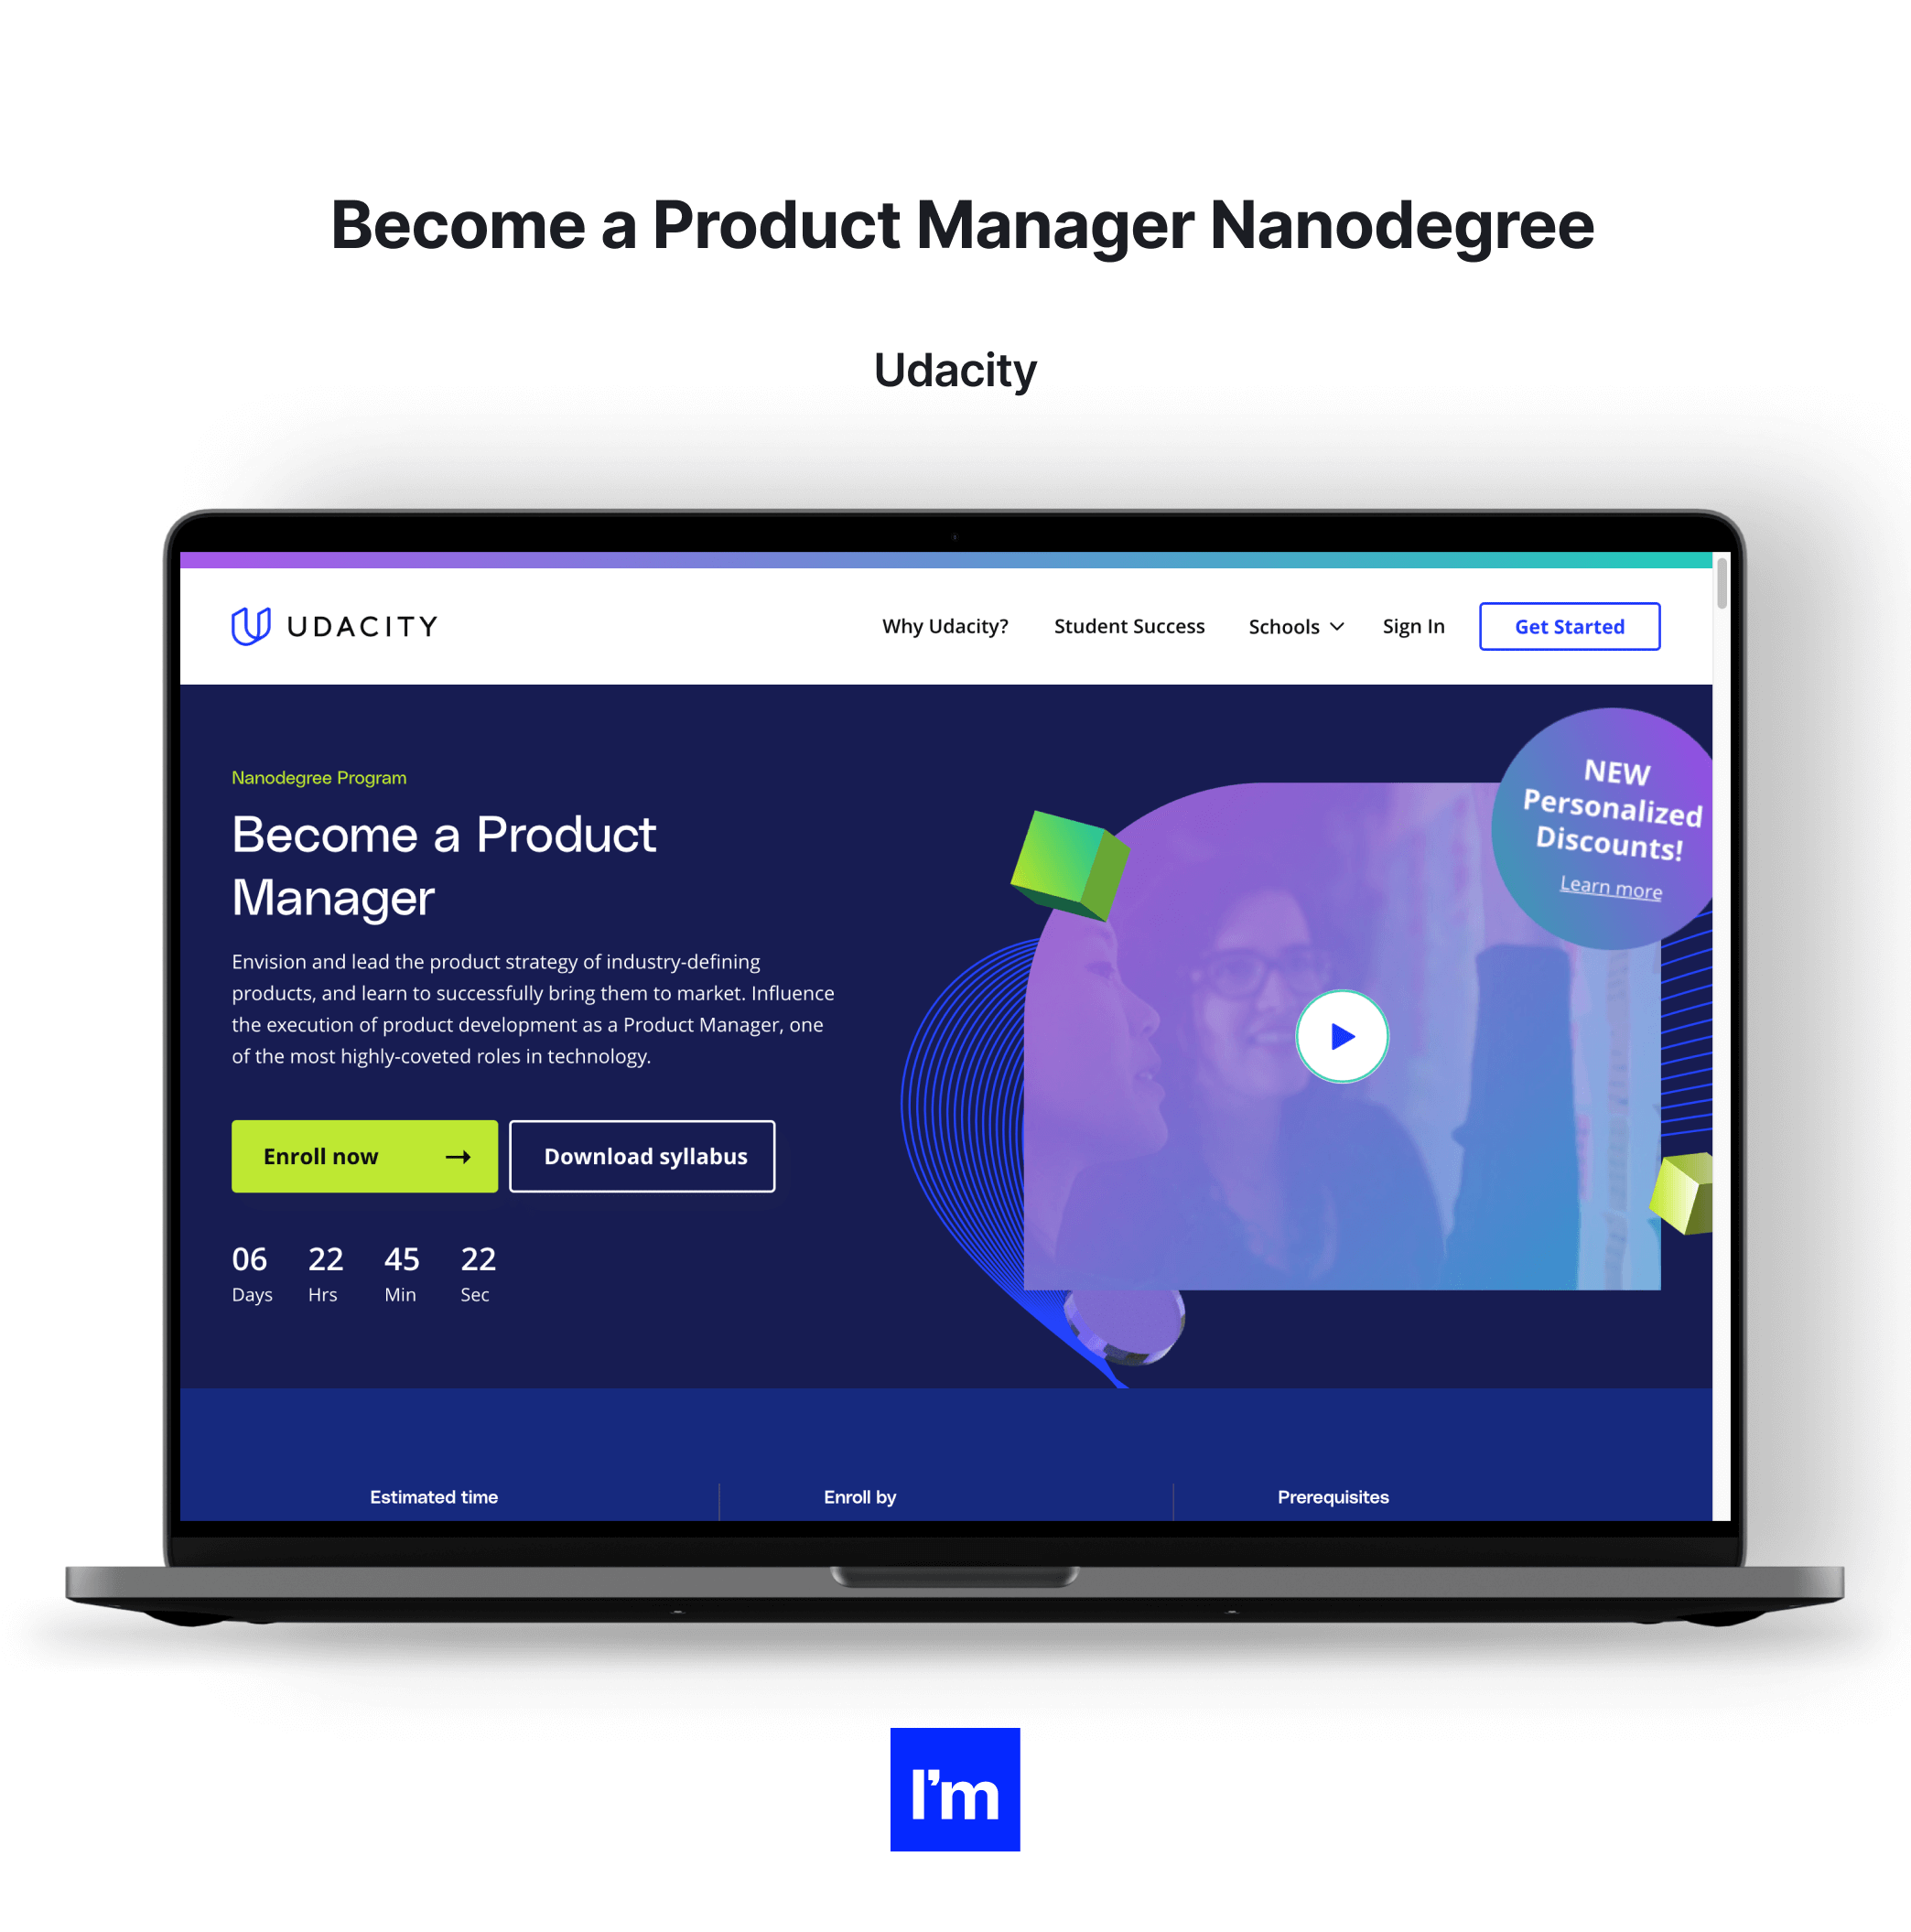 Top 10 Product Management Courses to Polish Your Skills in 2022 - Become a Product Manager Nanodegree Program